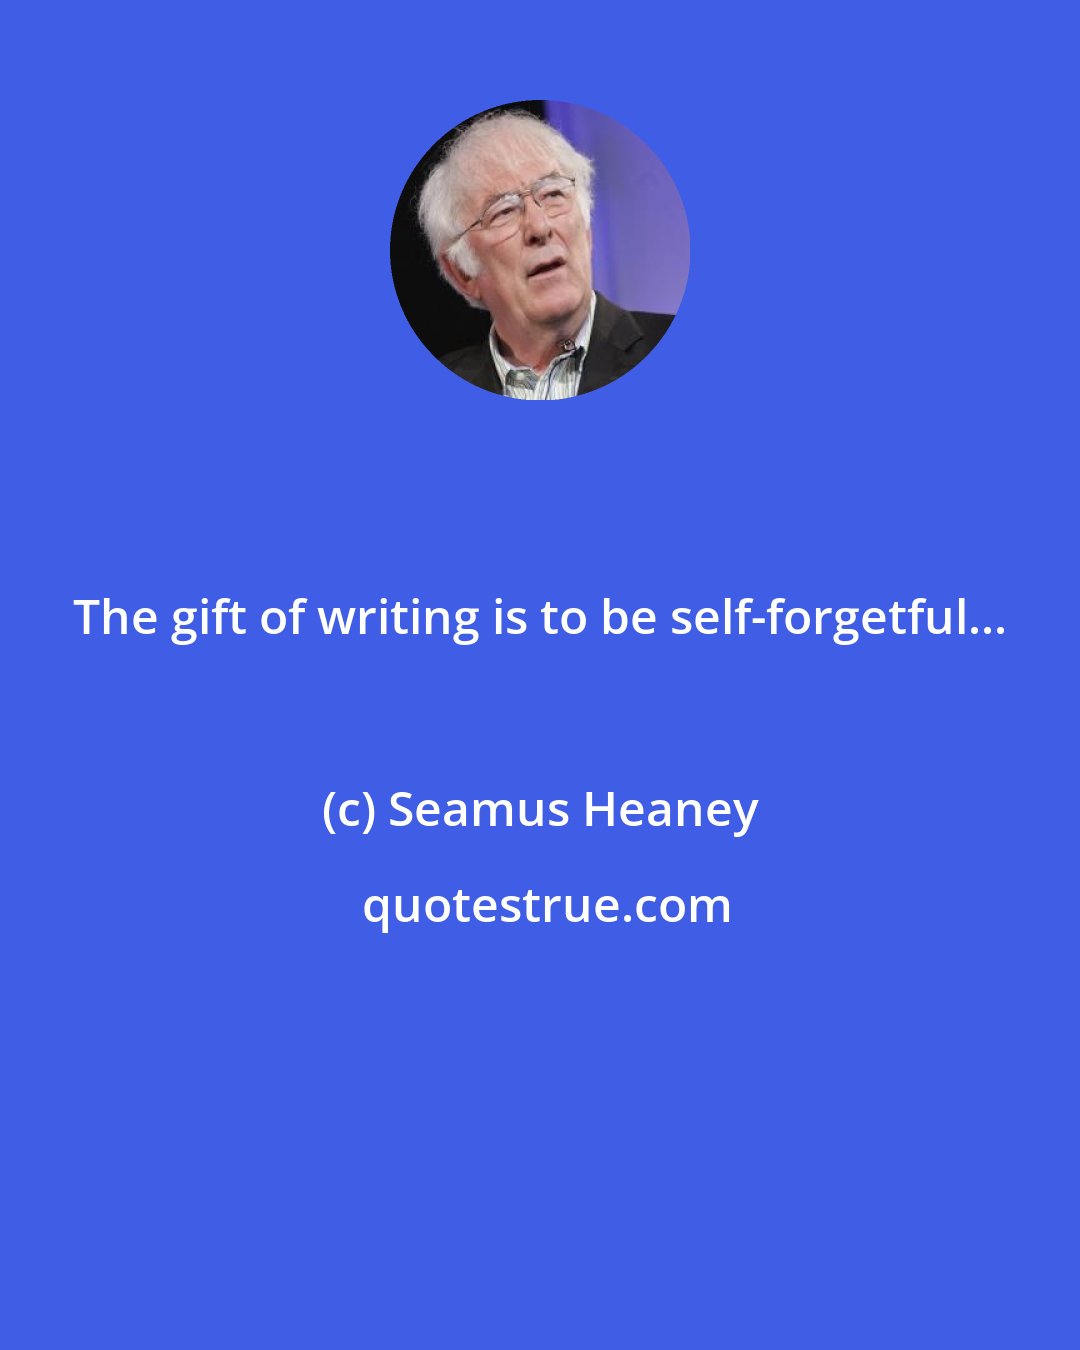 Seamus Heaney: The gift of writing is to be self-forgetful...